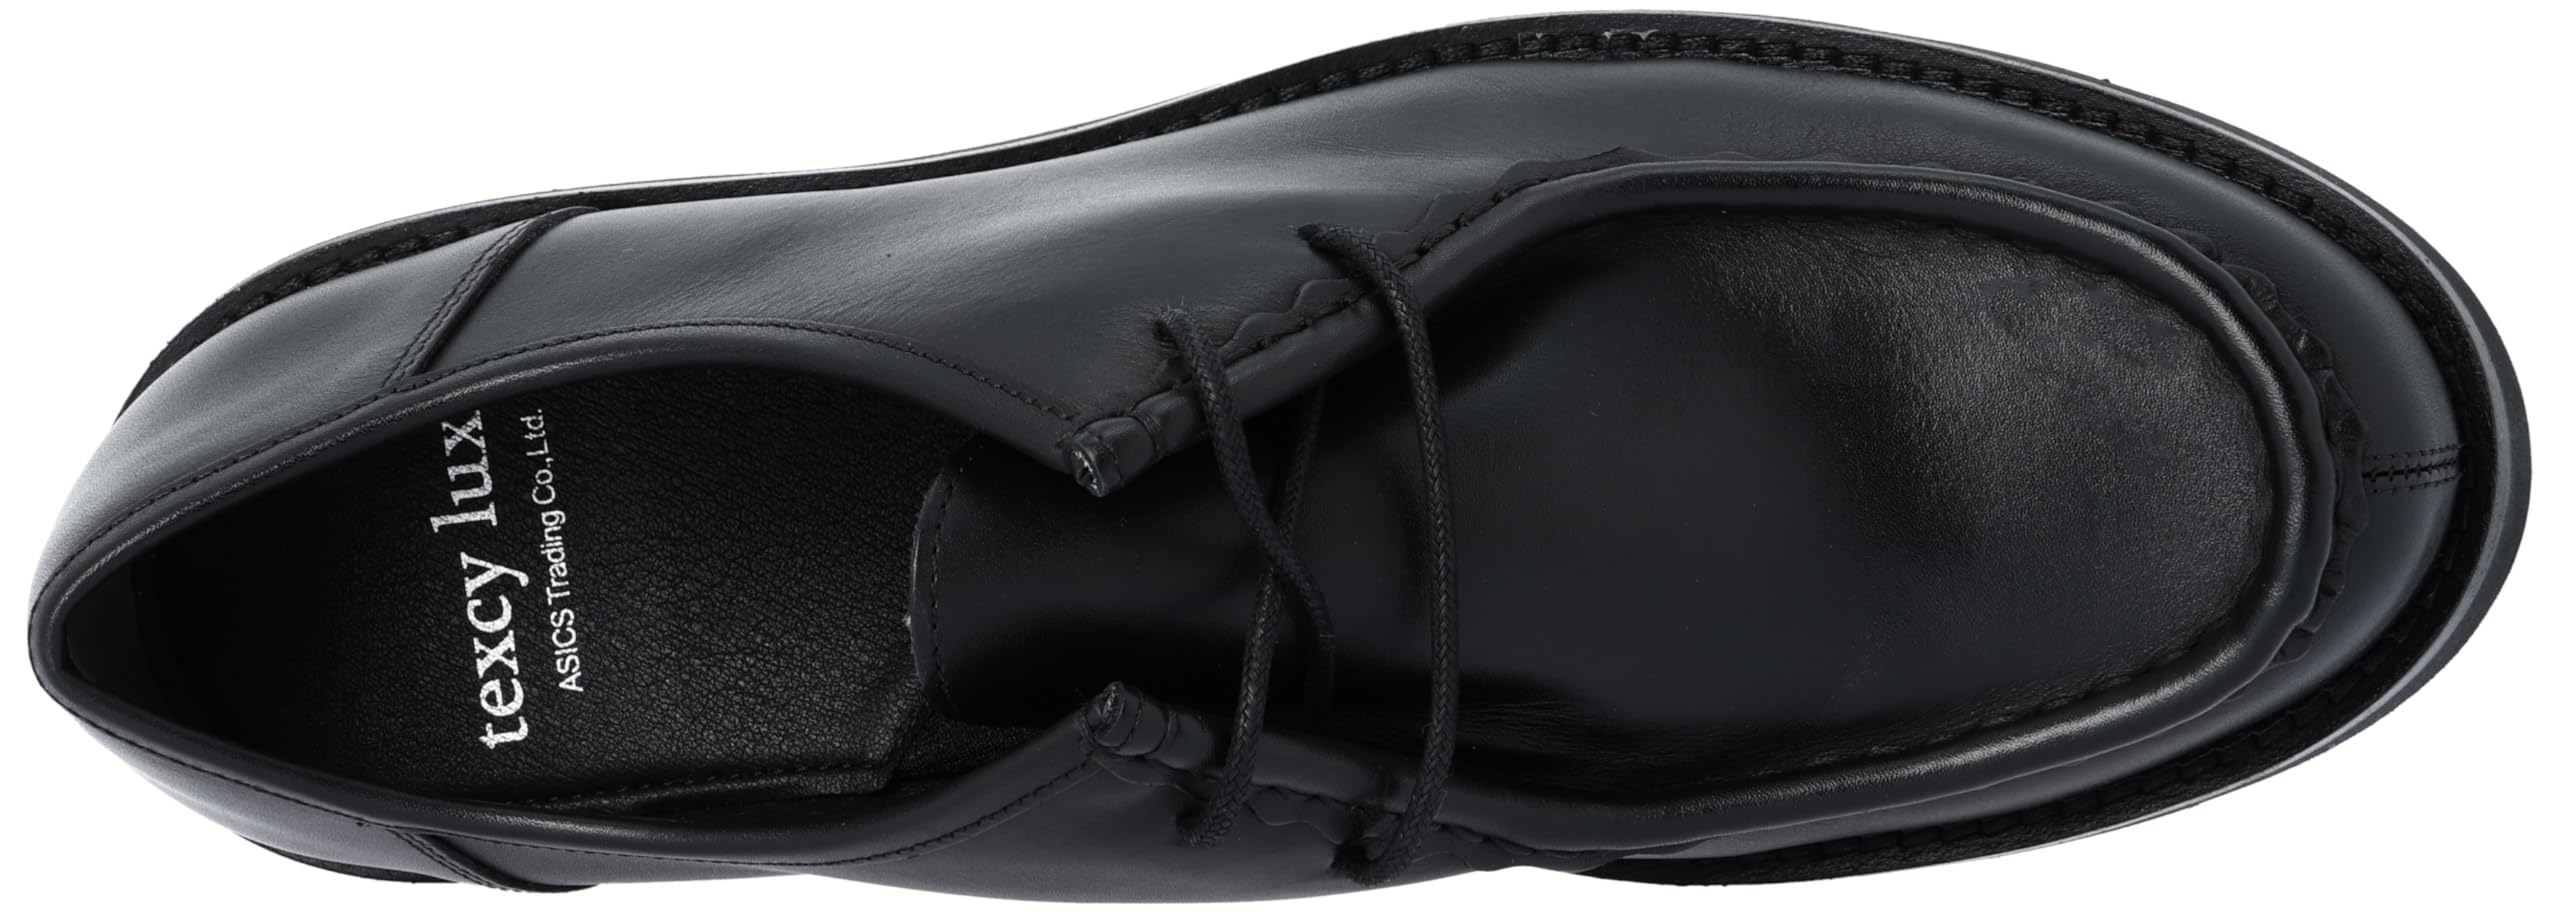 Texy Luxe Men's Business Shoes, Black